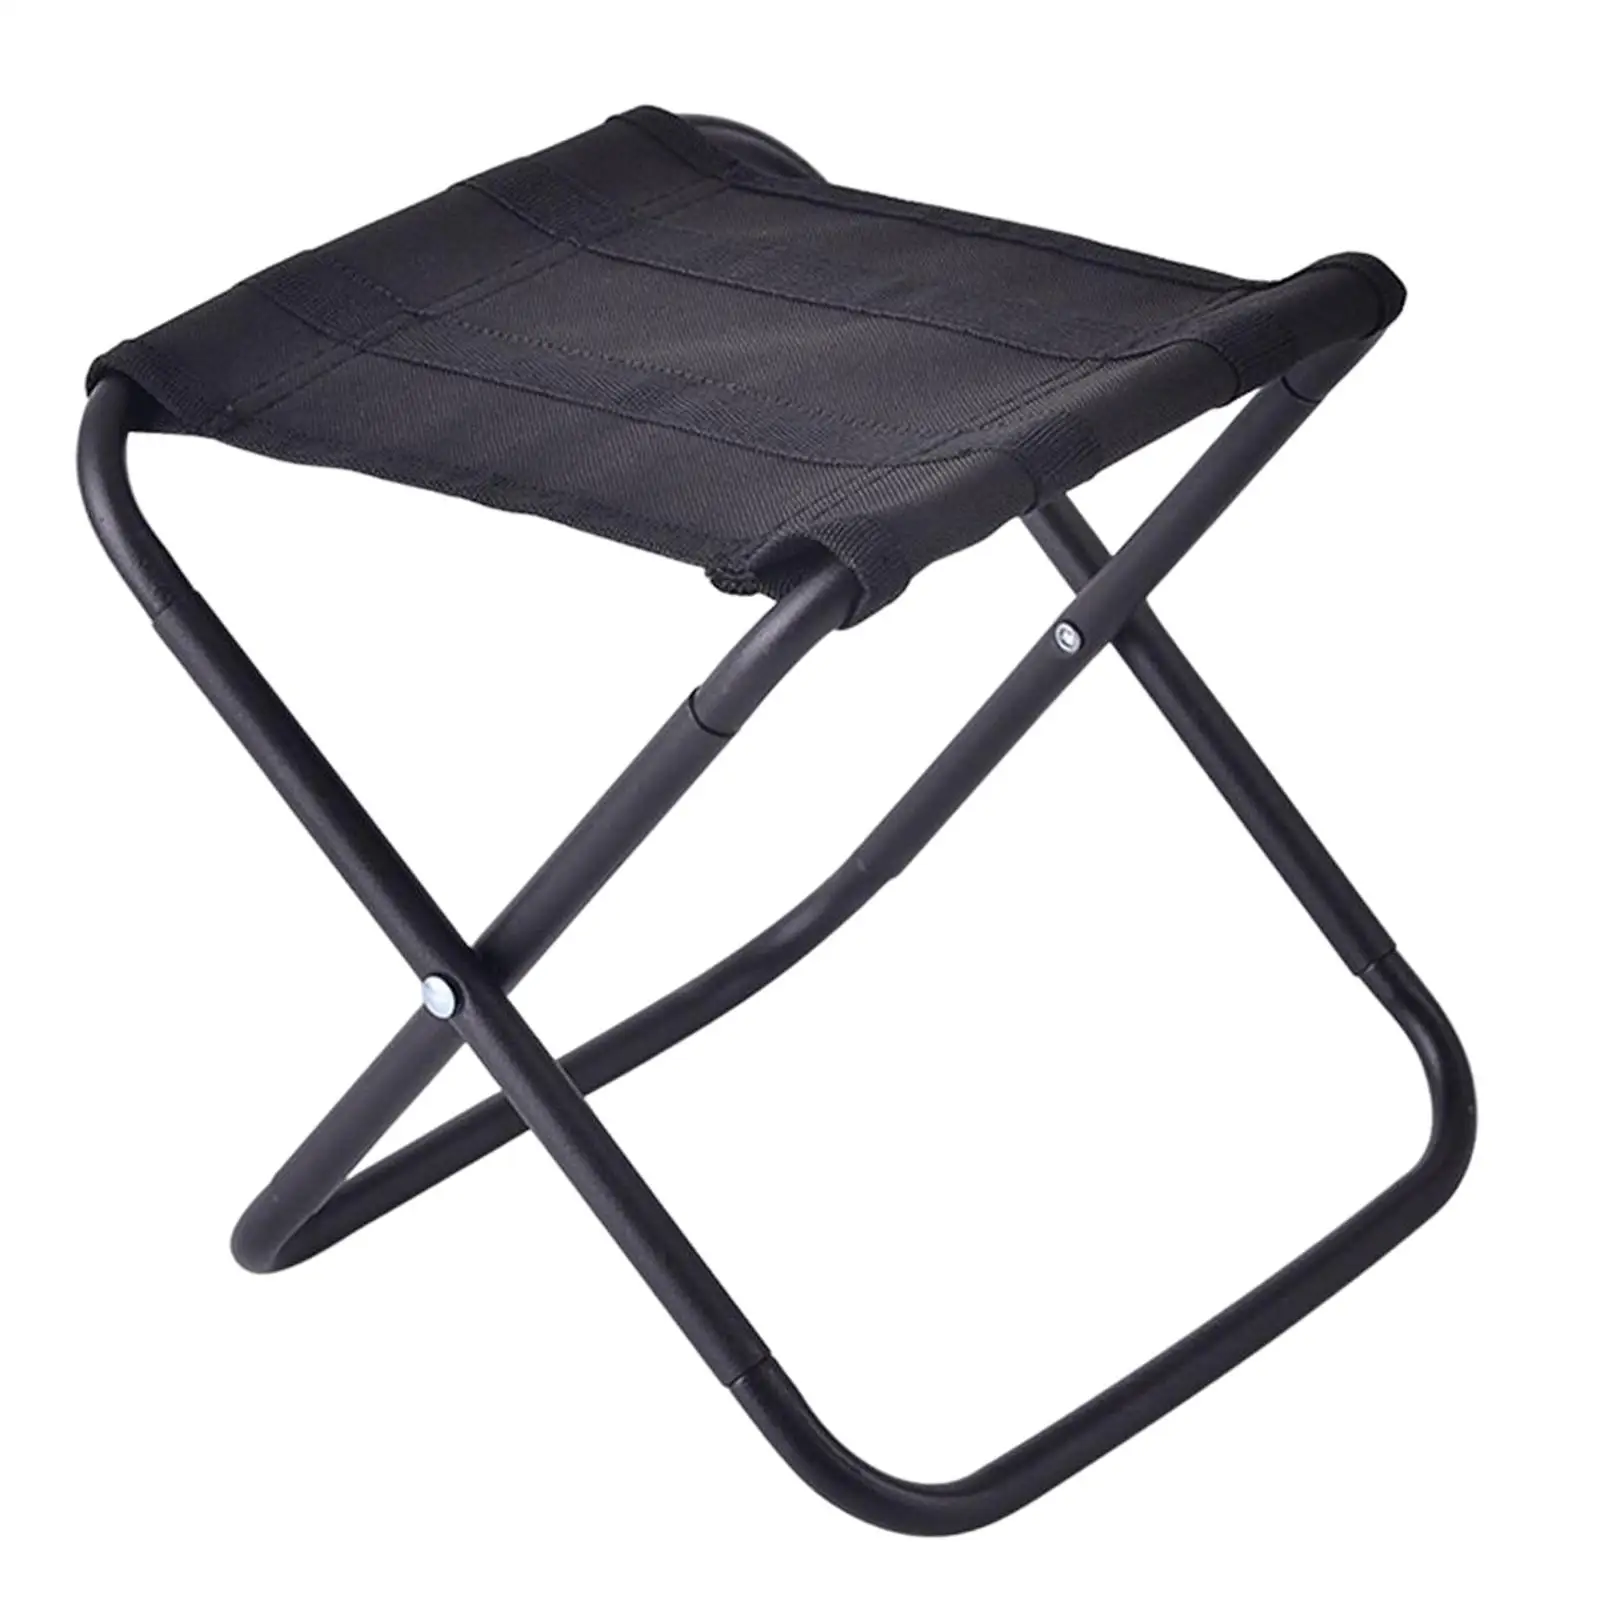 Camp Stool Fishing Chair Footrest Seat for Backpacking Walking Hiking Travel